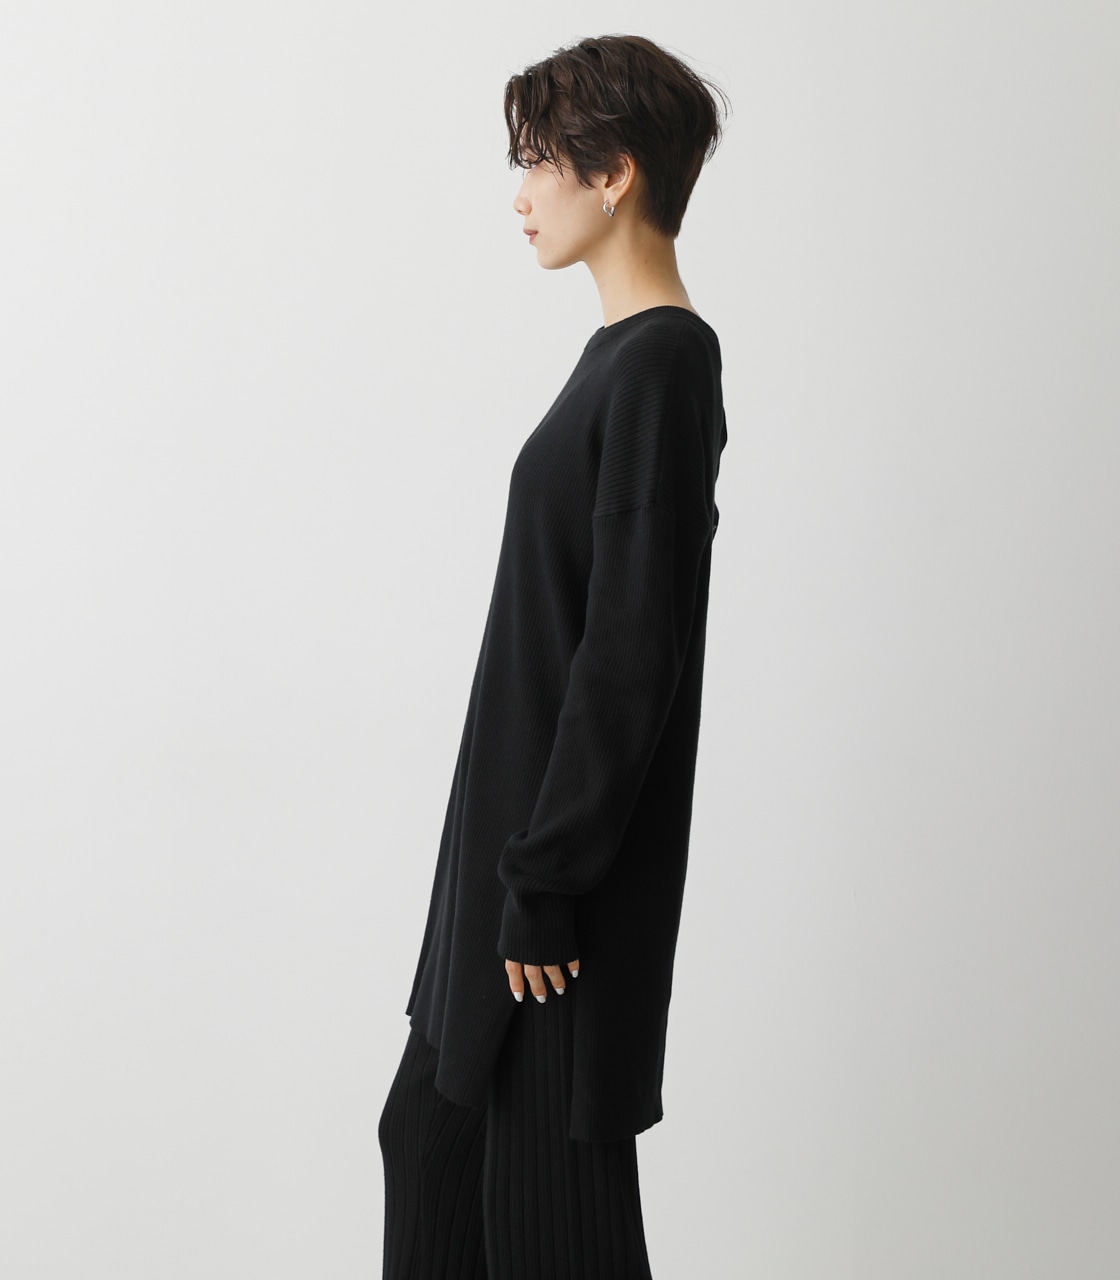 2WAY RIB KNIT LONG TOPS/2WAYリブニットロングトップス 詳細画像 BLK 6